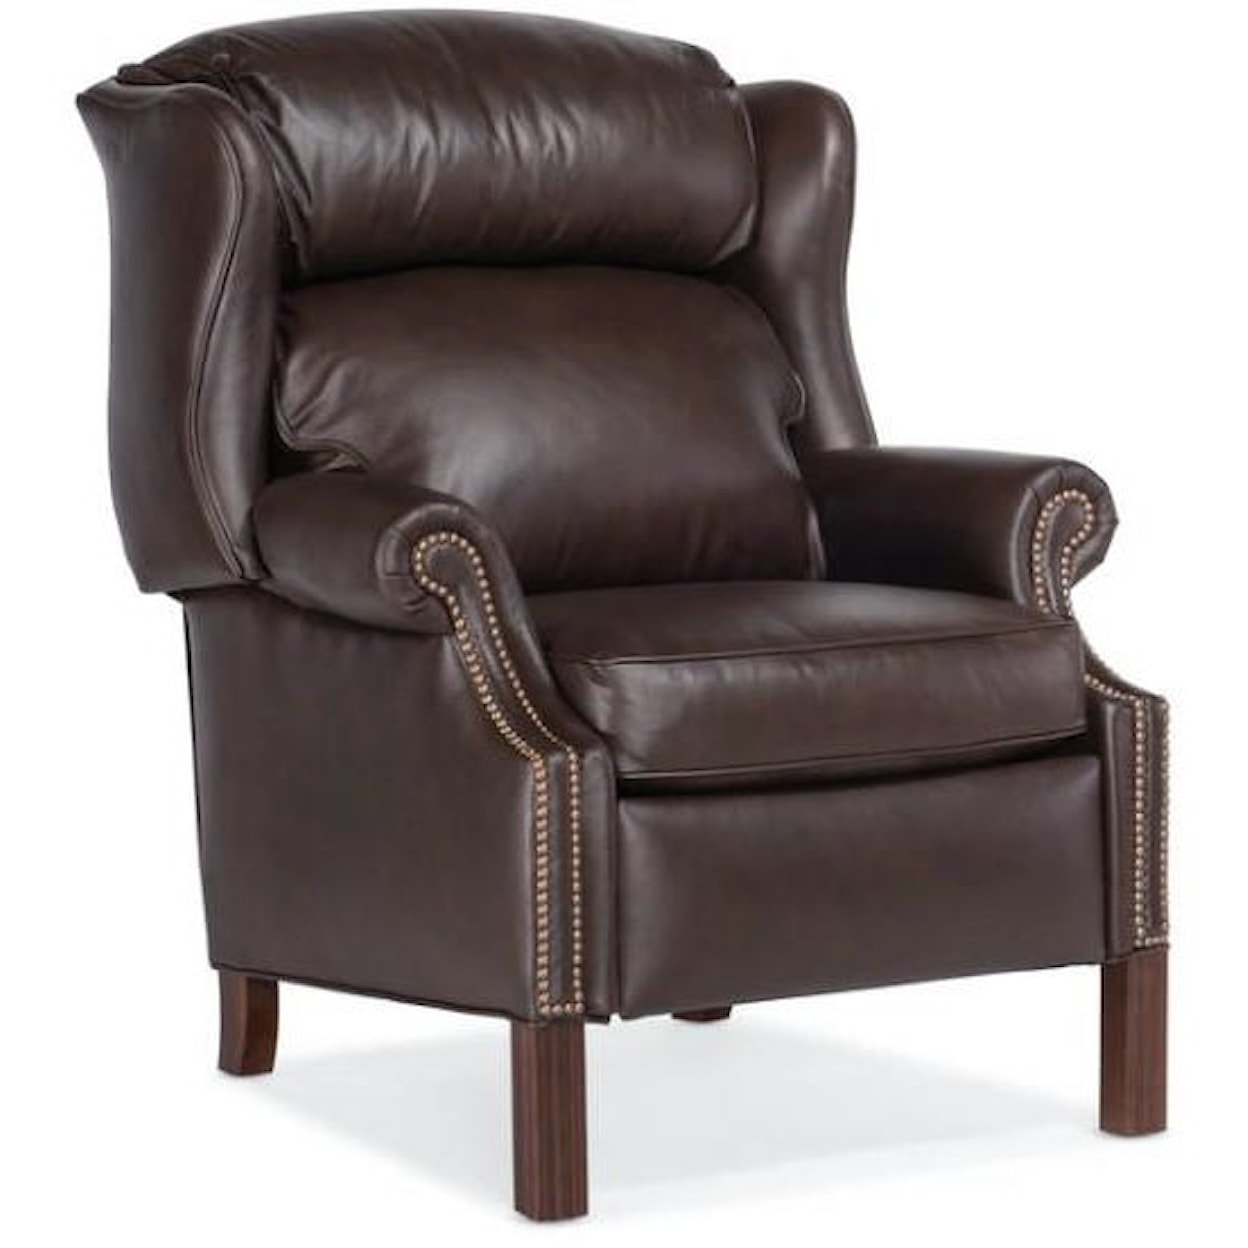 Bradington Young Chippendale Wing Back Recliner